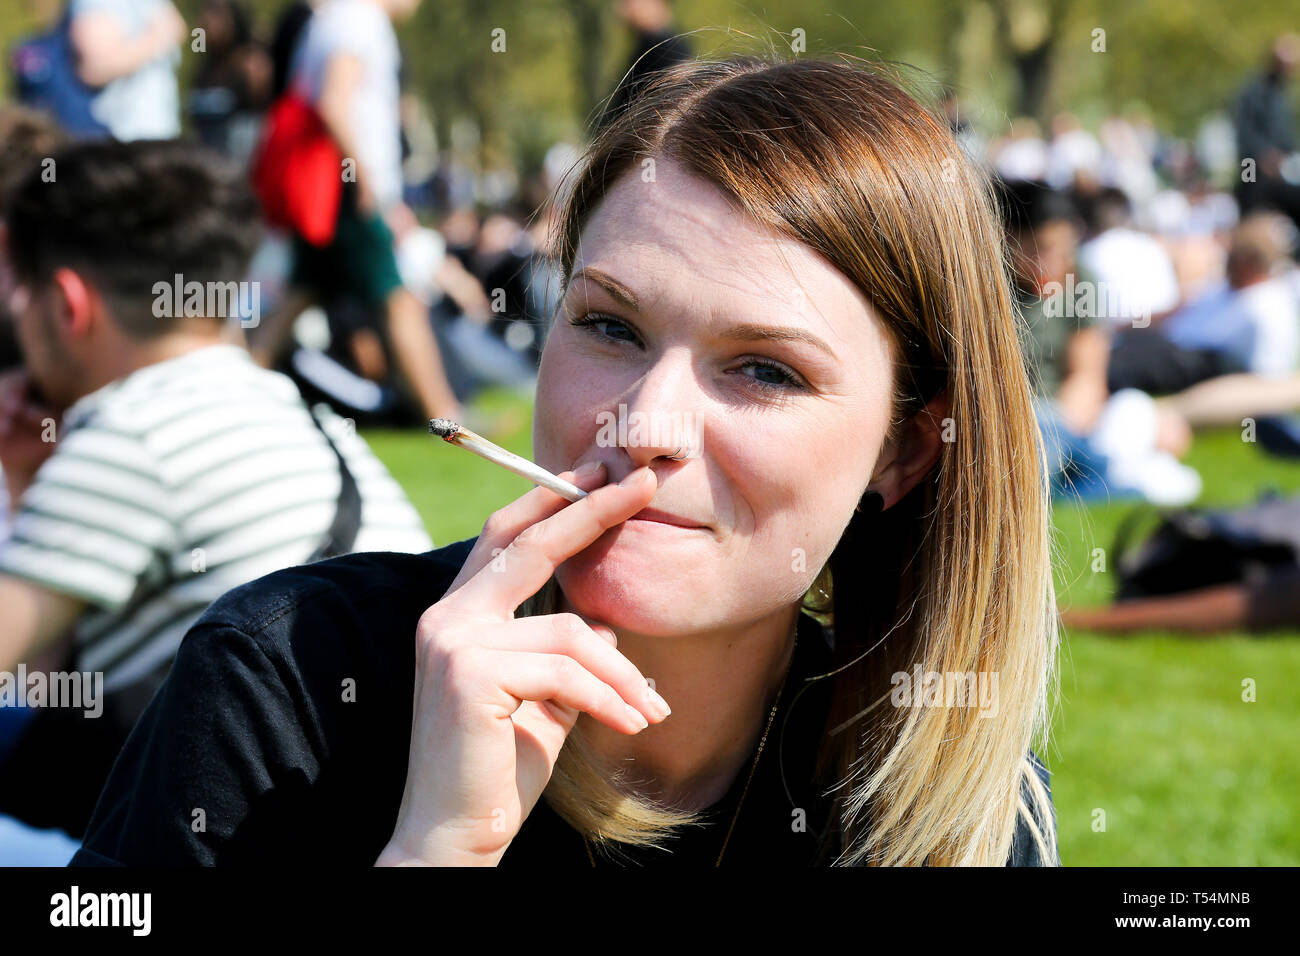 Hyde Park, London, UK 20 Apr 2019 - Tens of thousands of revellers gather to smoke cannabis in London’s Hyde Park without been arrested by the police as part of '4/20 Day', an unofficial International Weed Day event taking place on every year on 20 April. Attendees are calling on the Government to decriminalise Class B drug and raise awareness about the drug.  Credit: Dinendra Haria/Alamy Live News Stock Photo